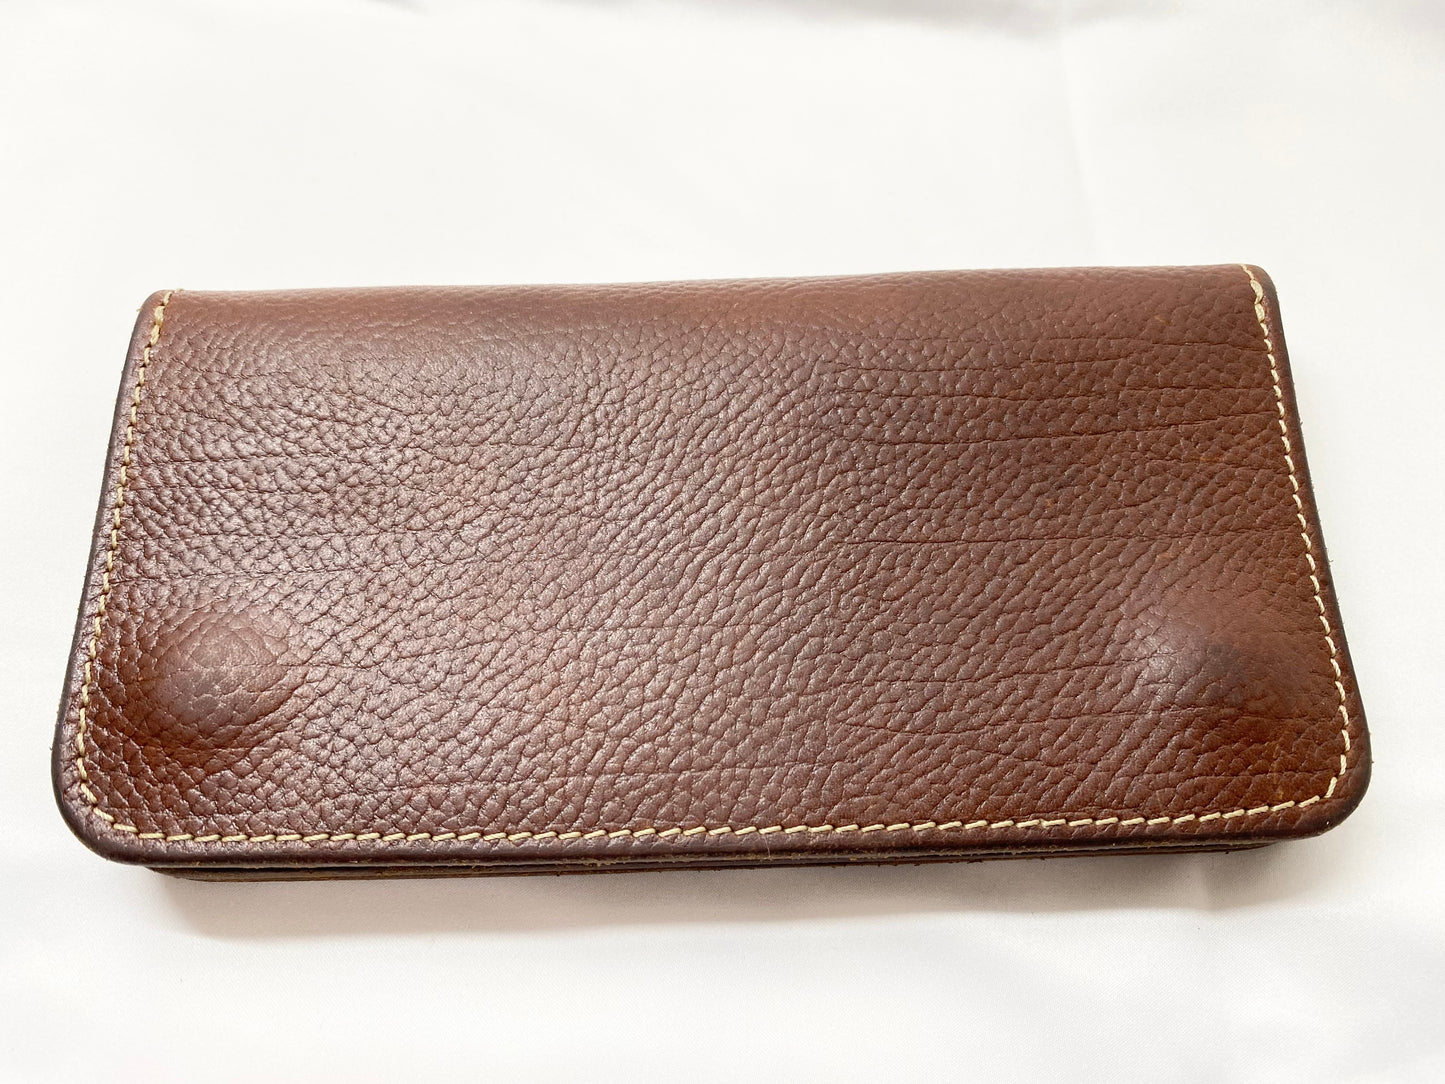 Larry Smith genuine leather long wallet LT0121